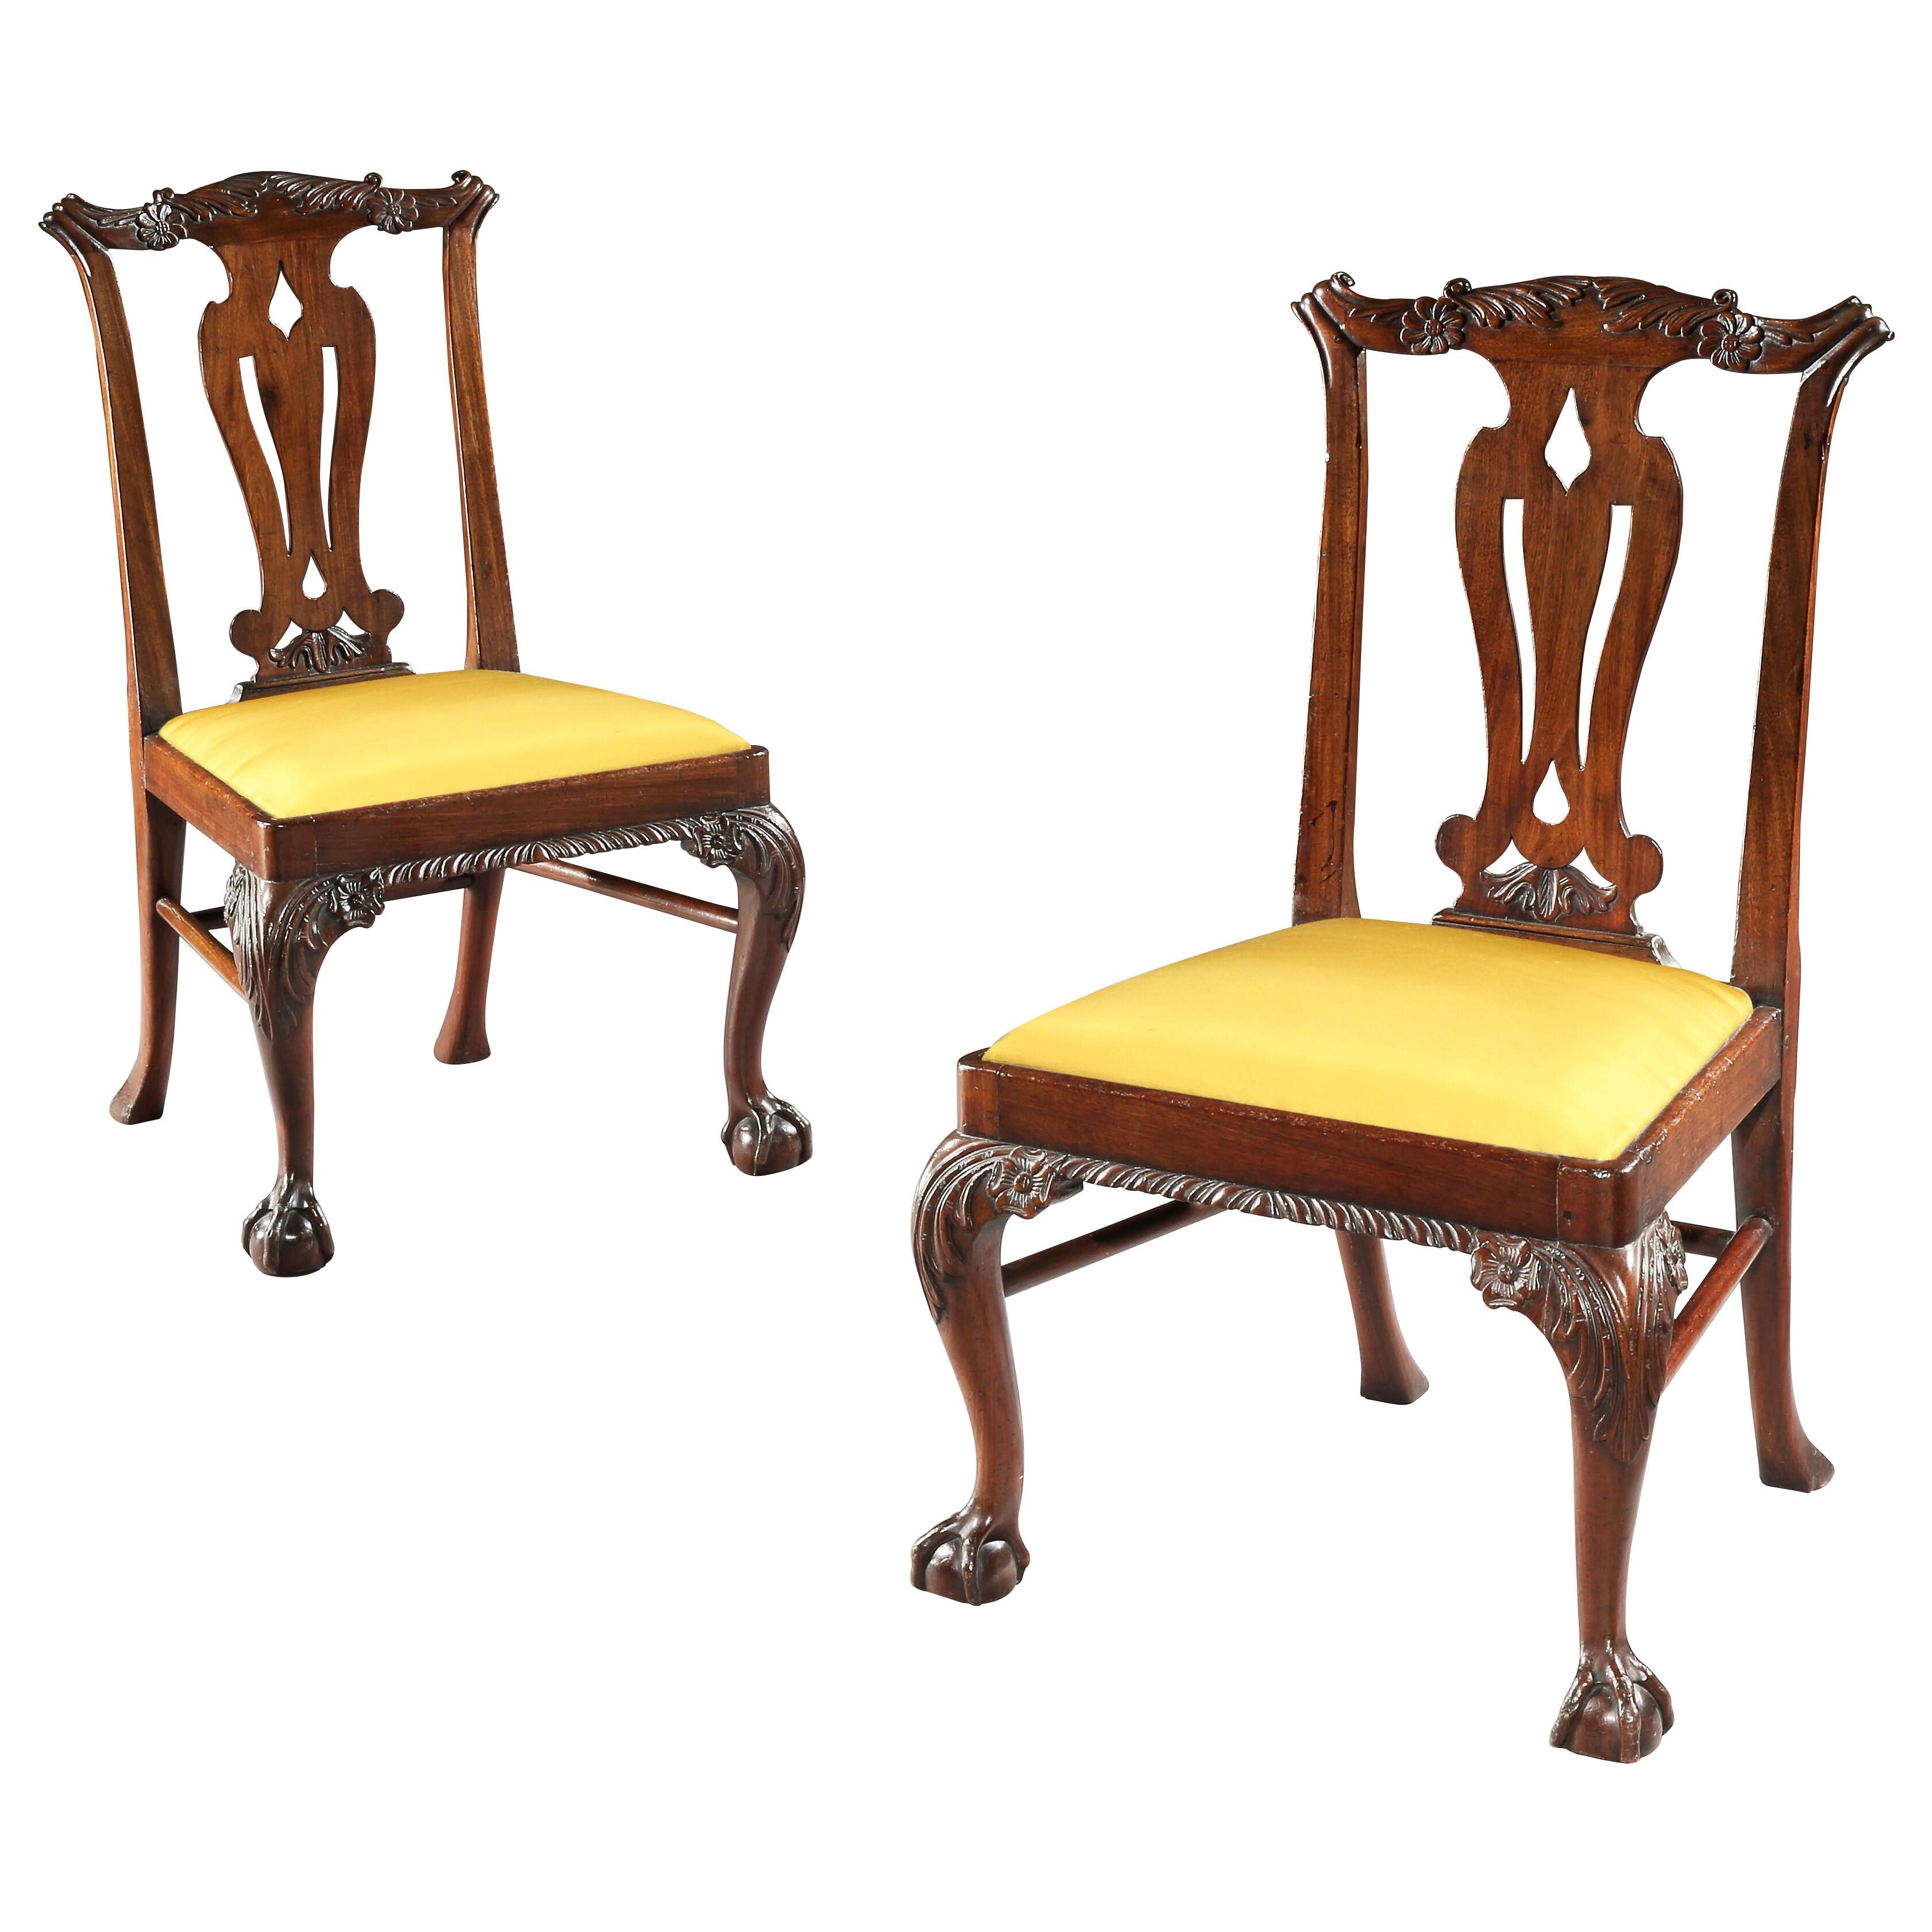 A pair of mid 18th century mahogany side chairs